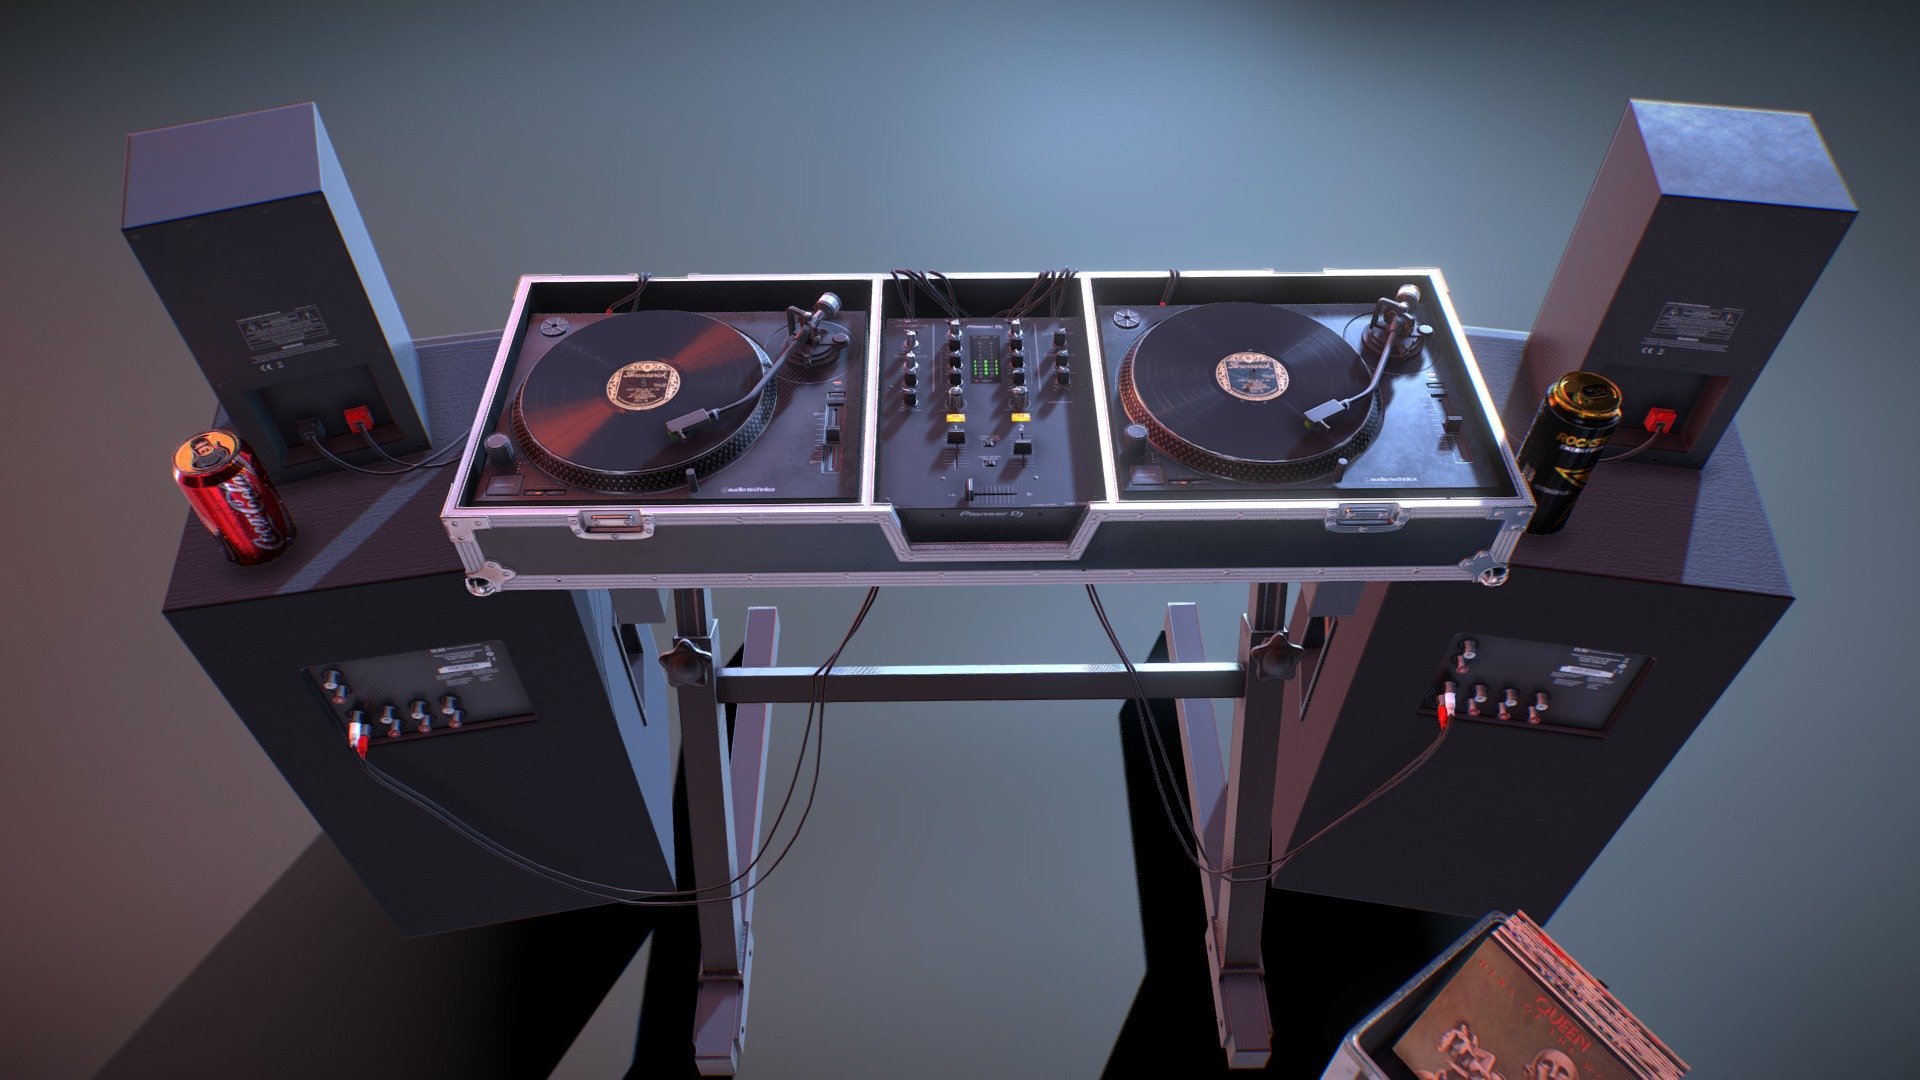 A little remake of my previous project from 2003, the DJ5000. I wanted to see how far I'd come with the tools and my personal skills since then, and I think the results speak for themselves!

Of course it helps that this is 44k triangles and utilizes several textures with the average size being 2048x2048, where the original from 2003 had only 445 triangles and a single 512x512 texture! So roughly this is about 100x more detailed than the original project! How far technology has come, and how far will it go further still.

Real world scale. Also included is a clean soda can texture set (no condensation drops), and a mask for the record to help you make your own labels, a Mixer emissive texture with all of the level lights lit up, and a gradient mask for the level lights so you drive them with material/code magic 3d model